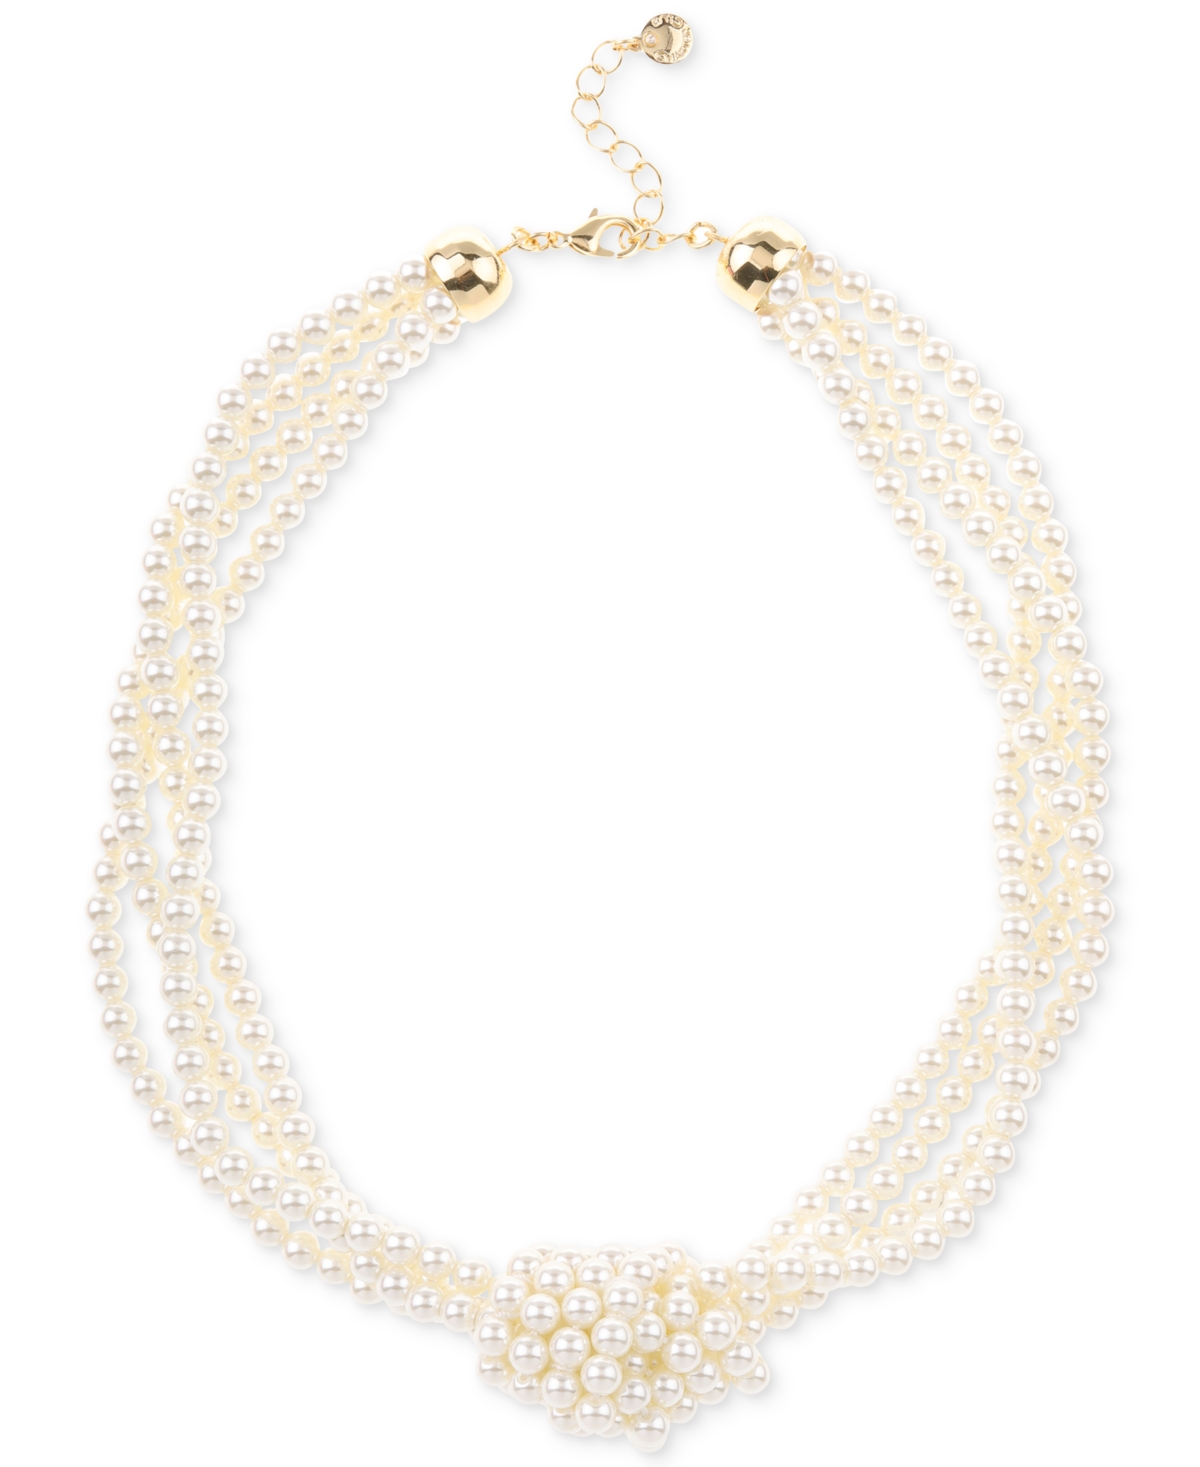 Imitation Pearl Knotted Multi-Row Strand Necklace, 19" + 2" extender, Created for Macy's - White